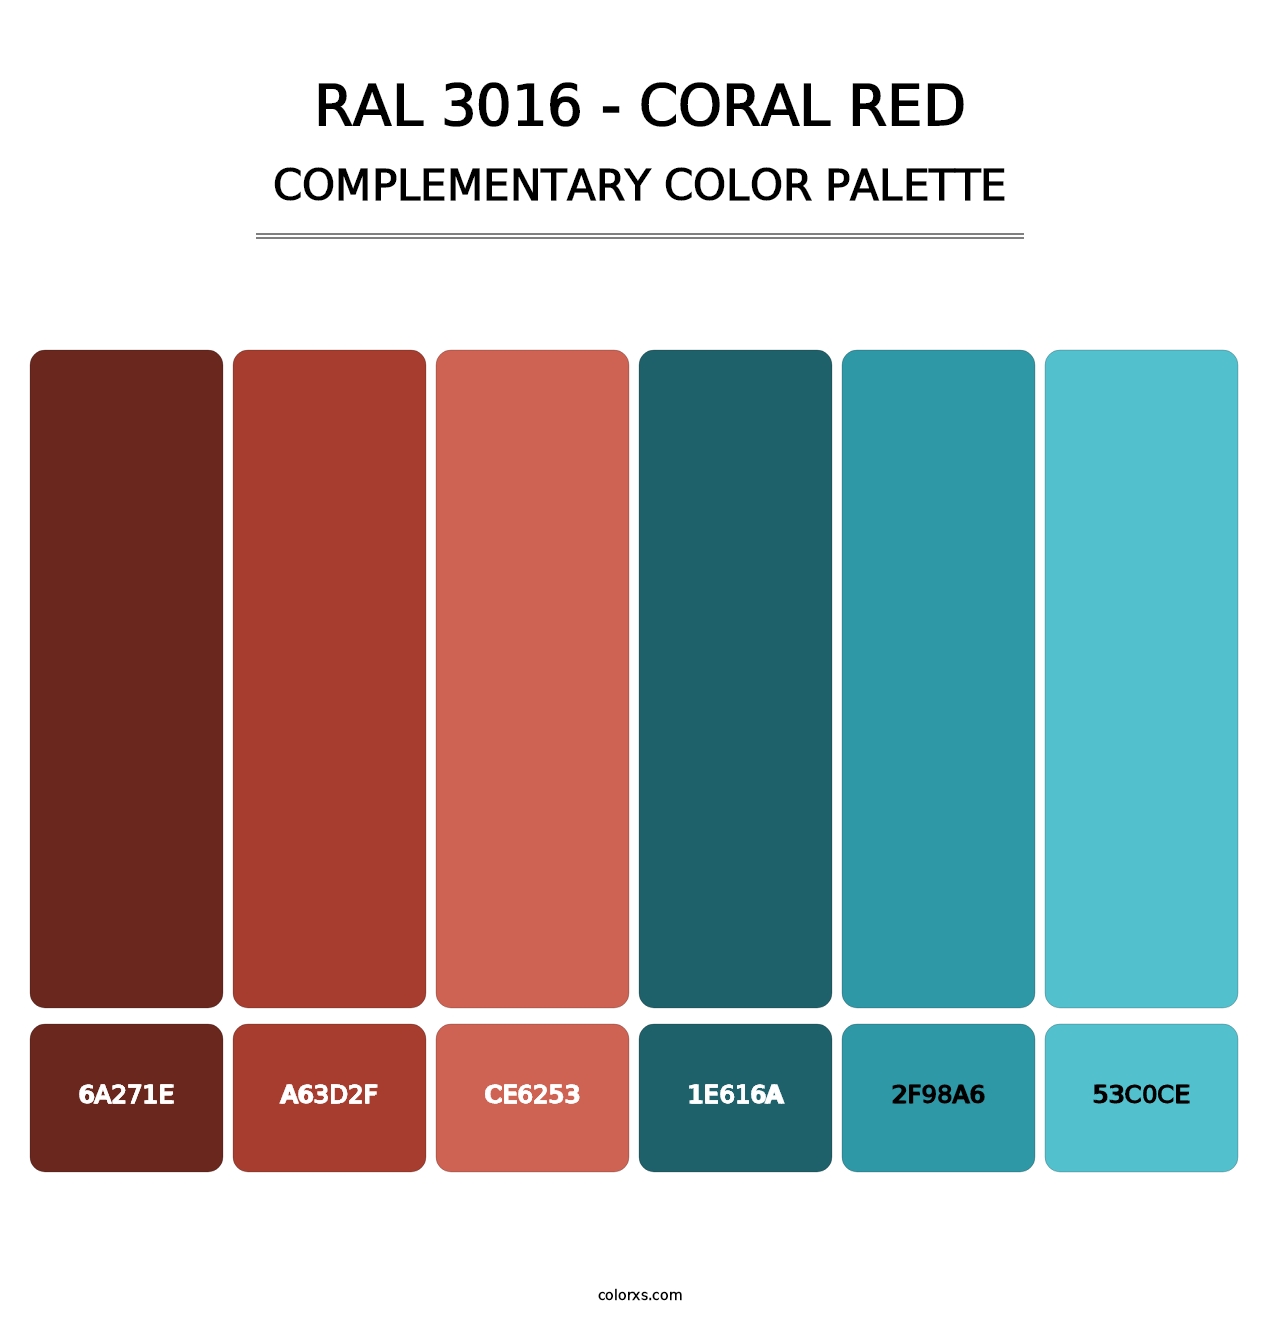 RAL 3016 - Coral Red - Complementary Color Palette